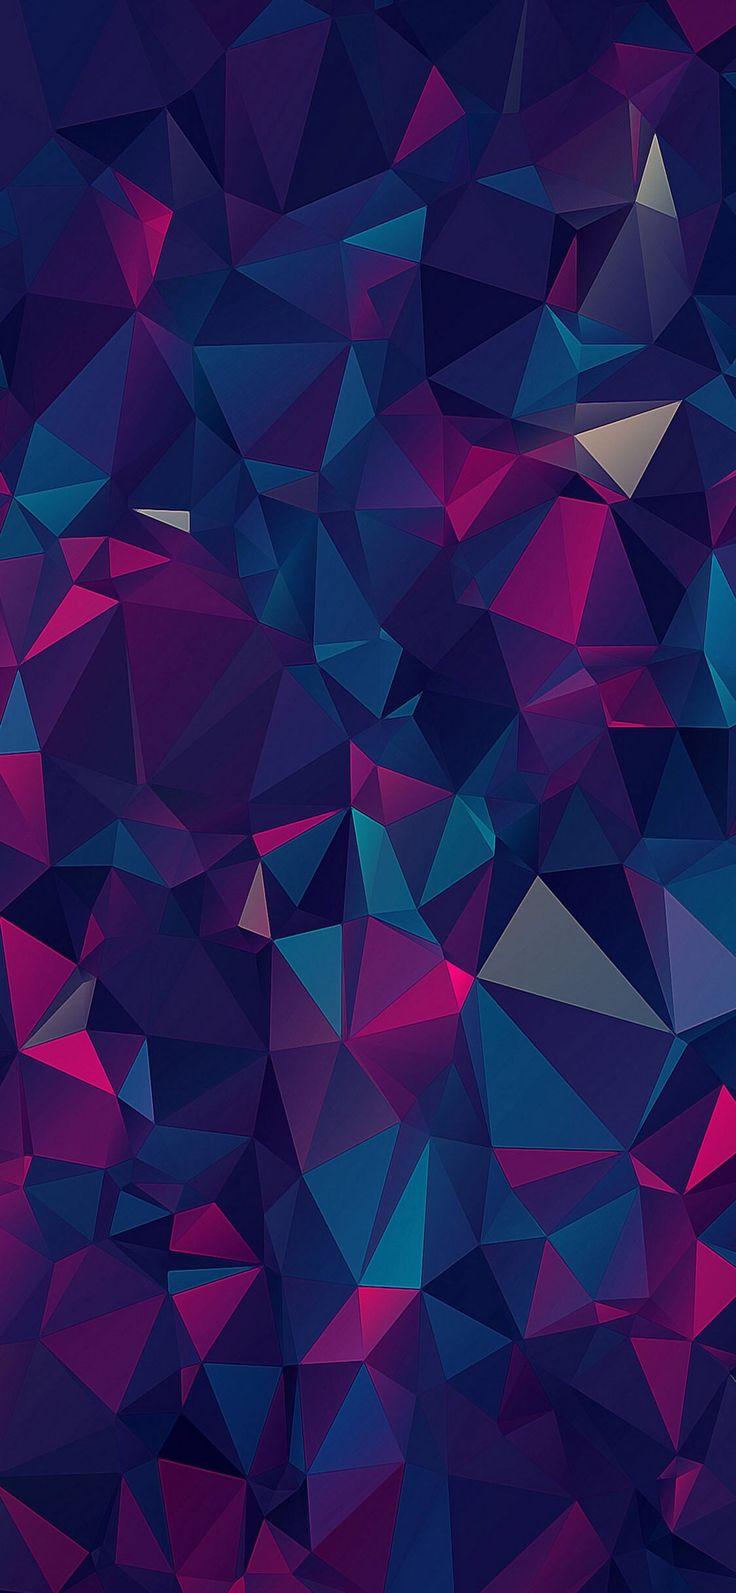 iOS iPhone X, purple, blue, clean, simple, abstract